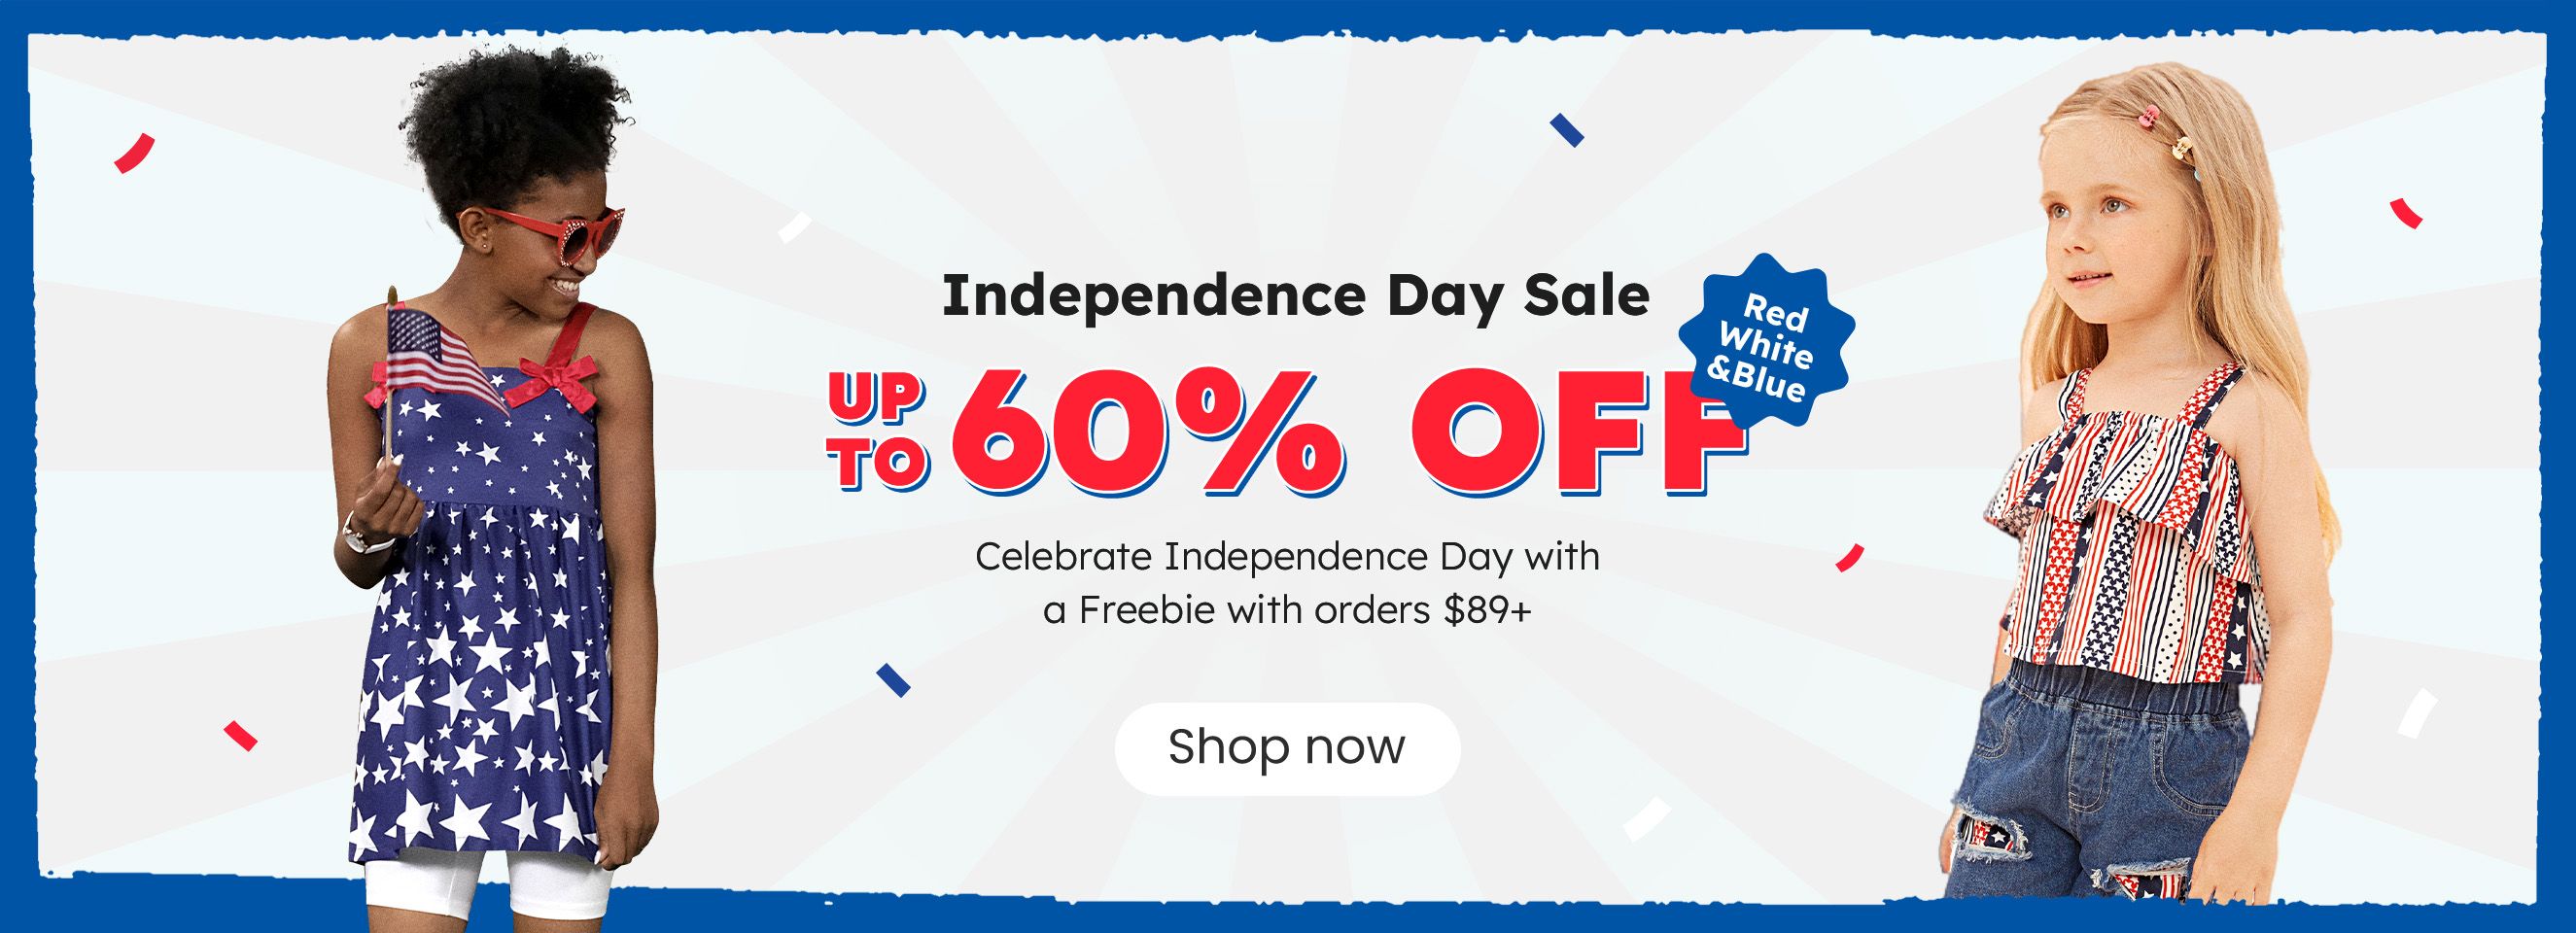 Click it to join Independence Day Sale activity